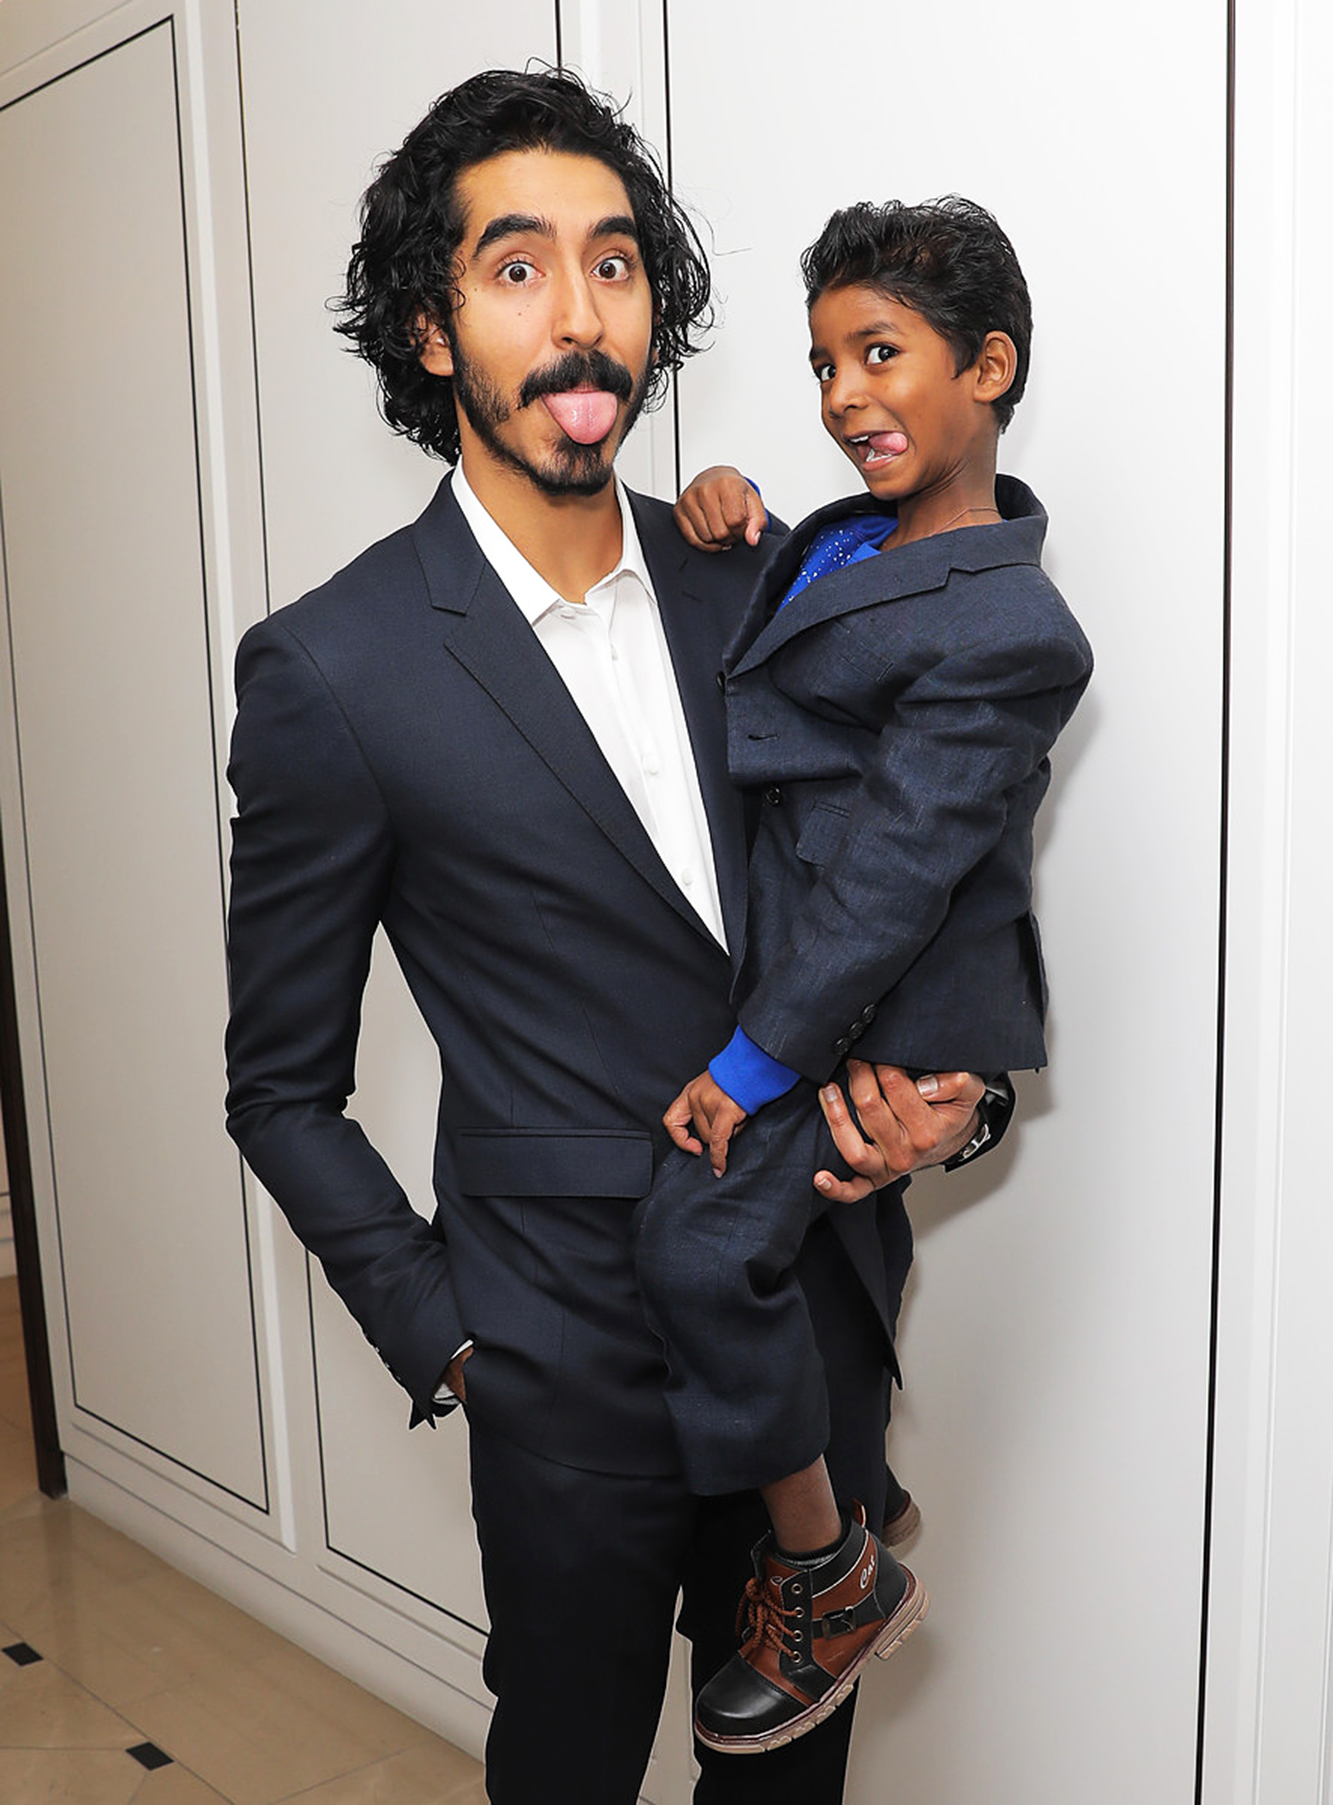 Dev Patel and Sunny Pawar at  Burberry and The Weinstein Company honor Dev Patel,  in Los Angeles, on Nov. 30, 2016.